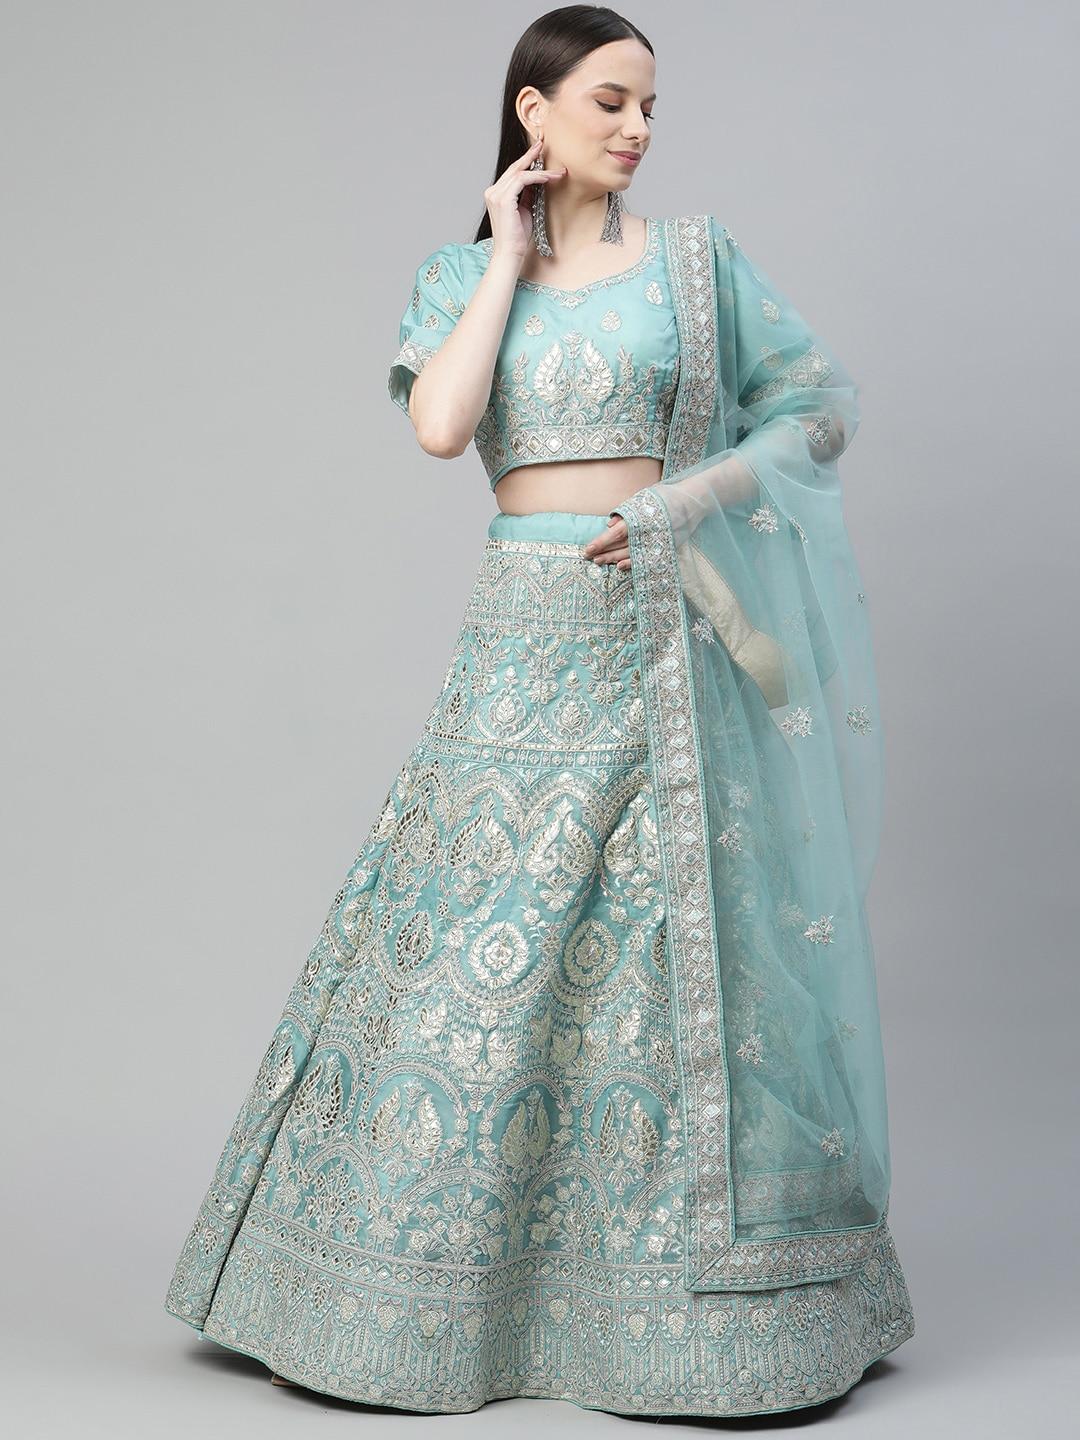 readiprint-fashions-turquoise-blue-embroidered-unstitched-lehenga-&-blouse-with-dupatta